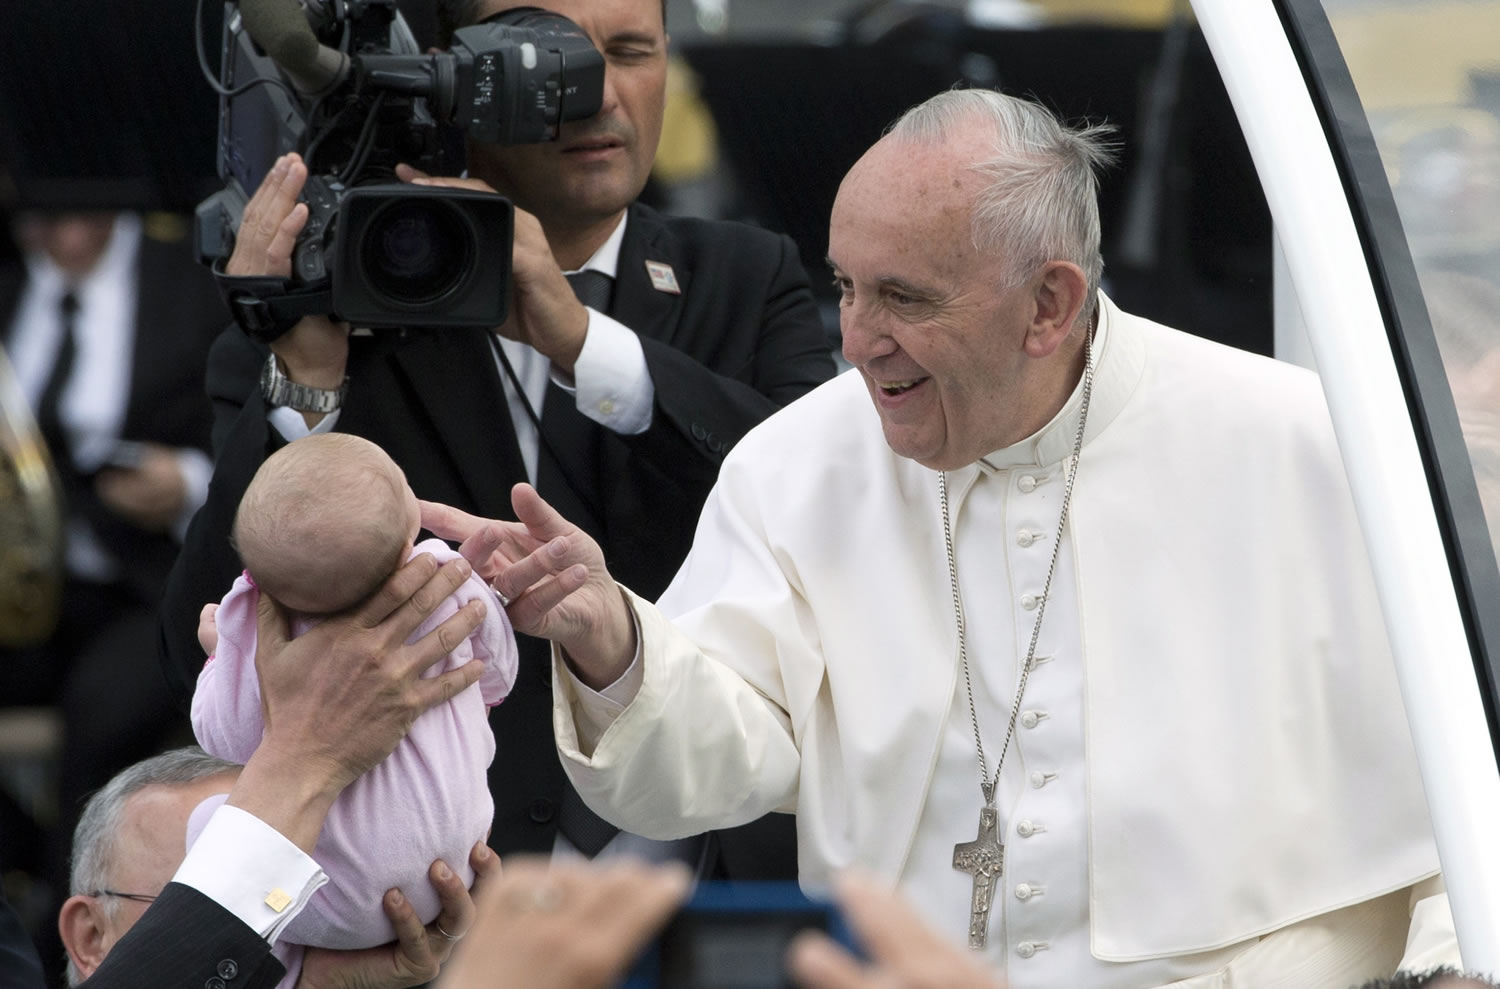 Pope Francis greets a baby as he arrives to Independence Mall, on Saturday, before delivering a speech in front of Independence Hall, in Philadelphia.